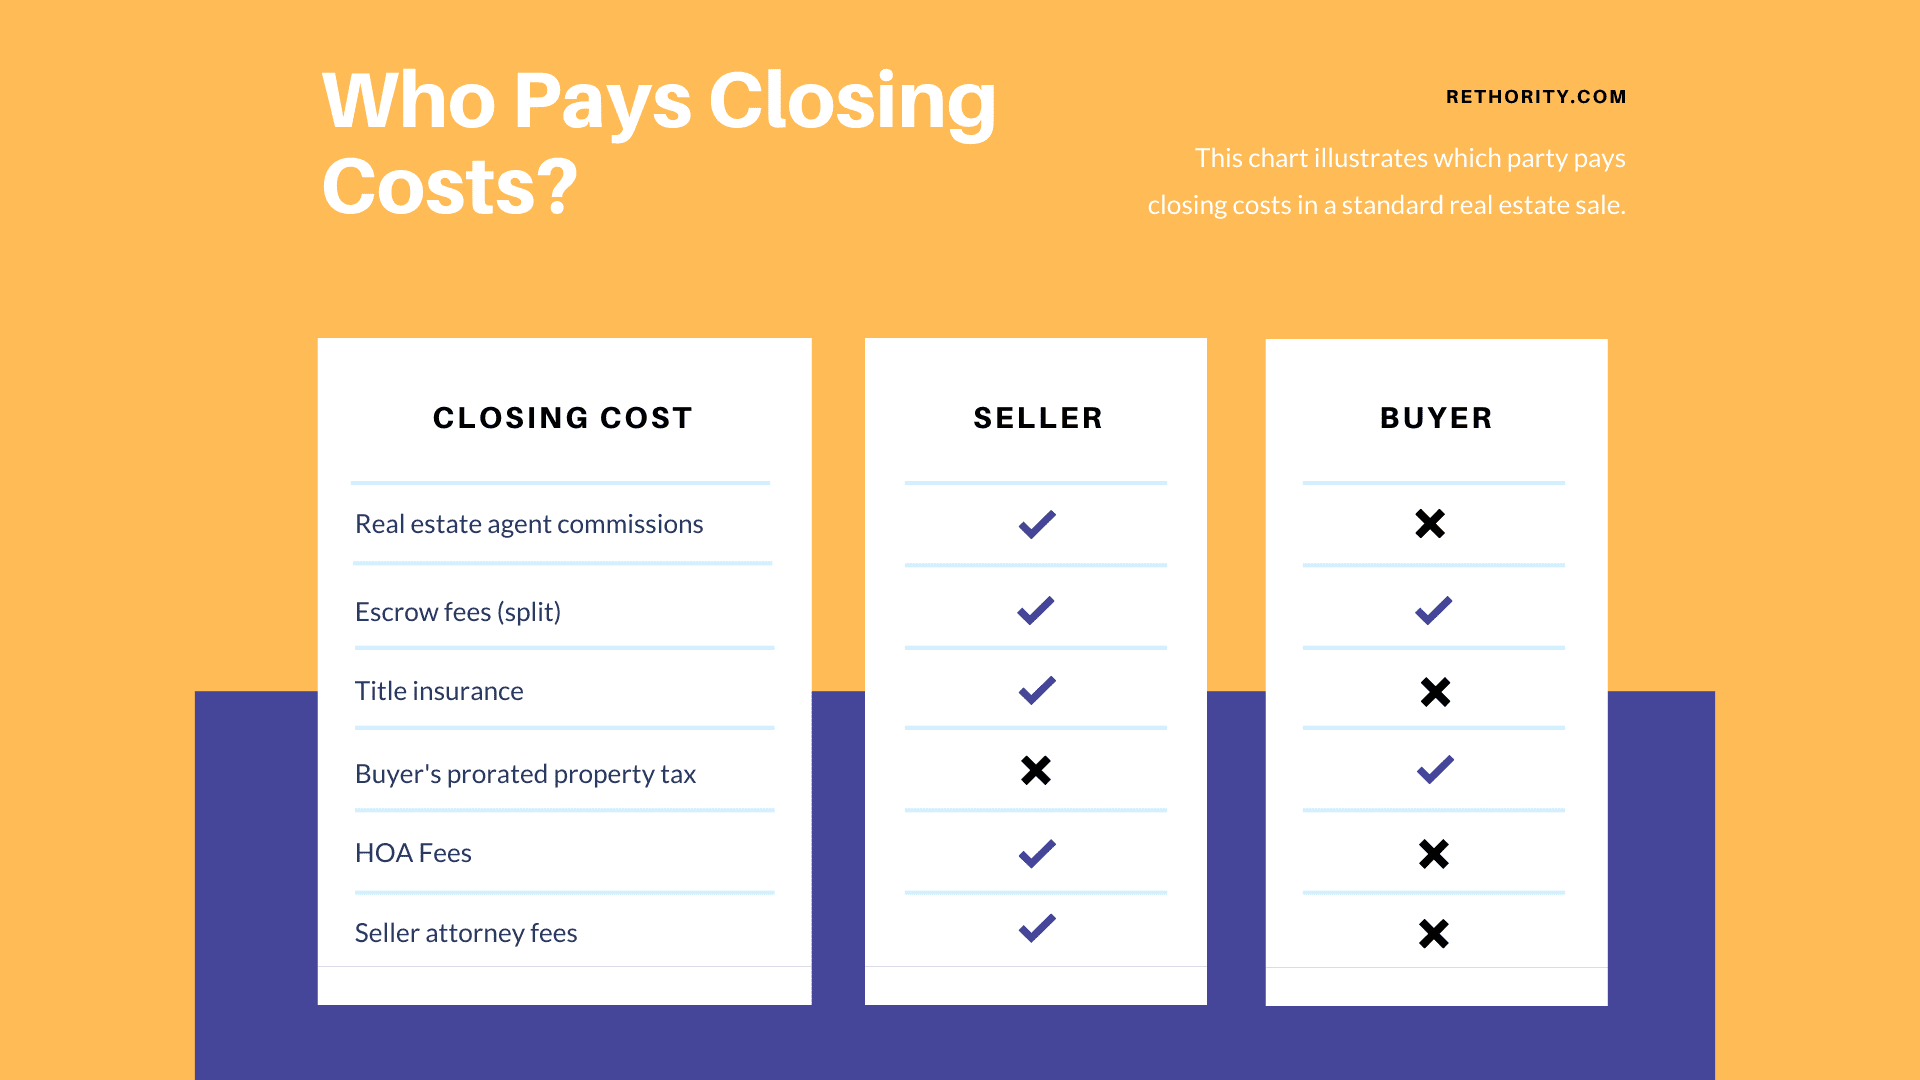 Who Pays Closing Costs comparison table between the buyer and seller responsibilities